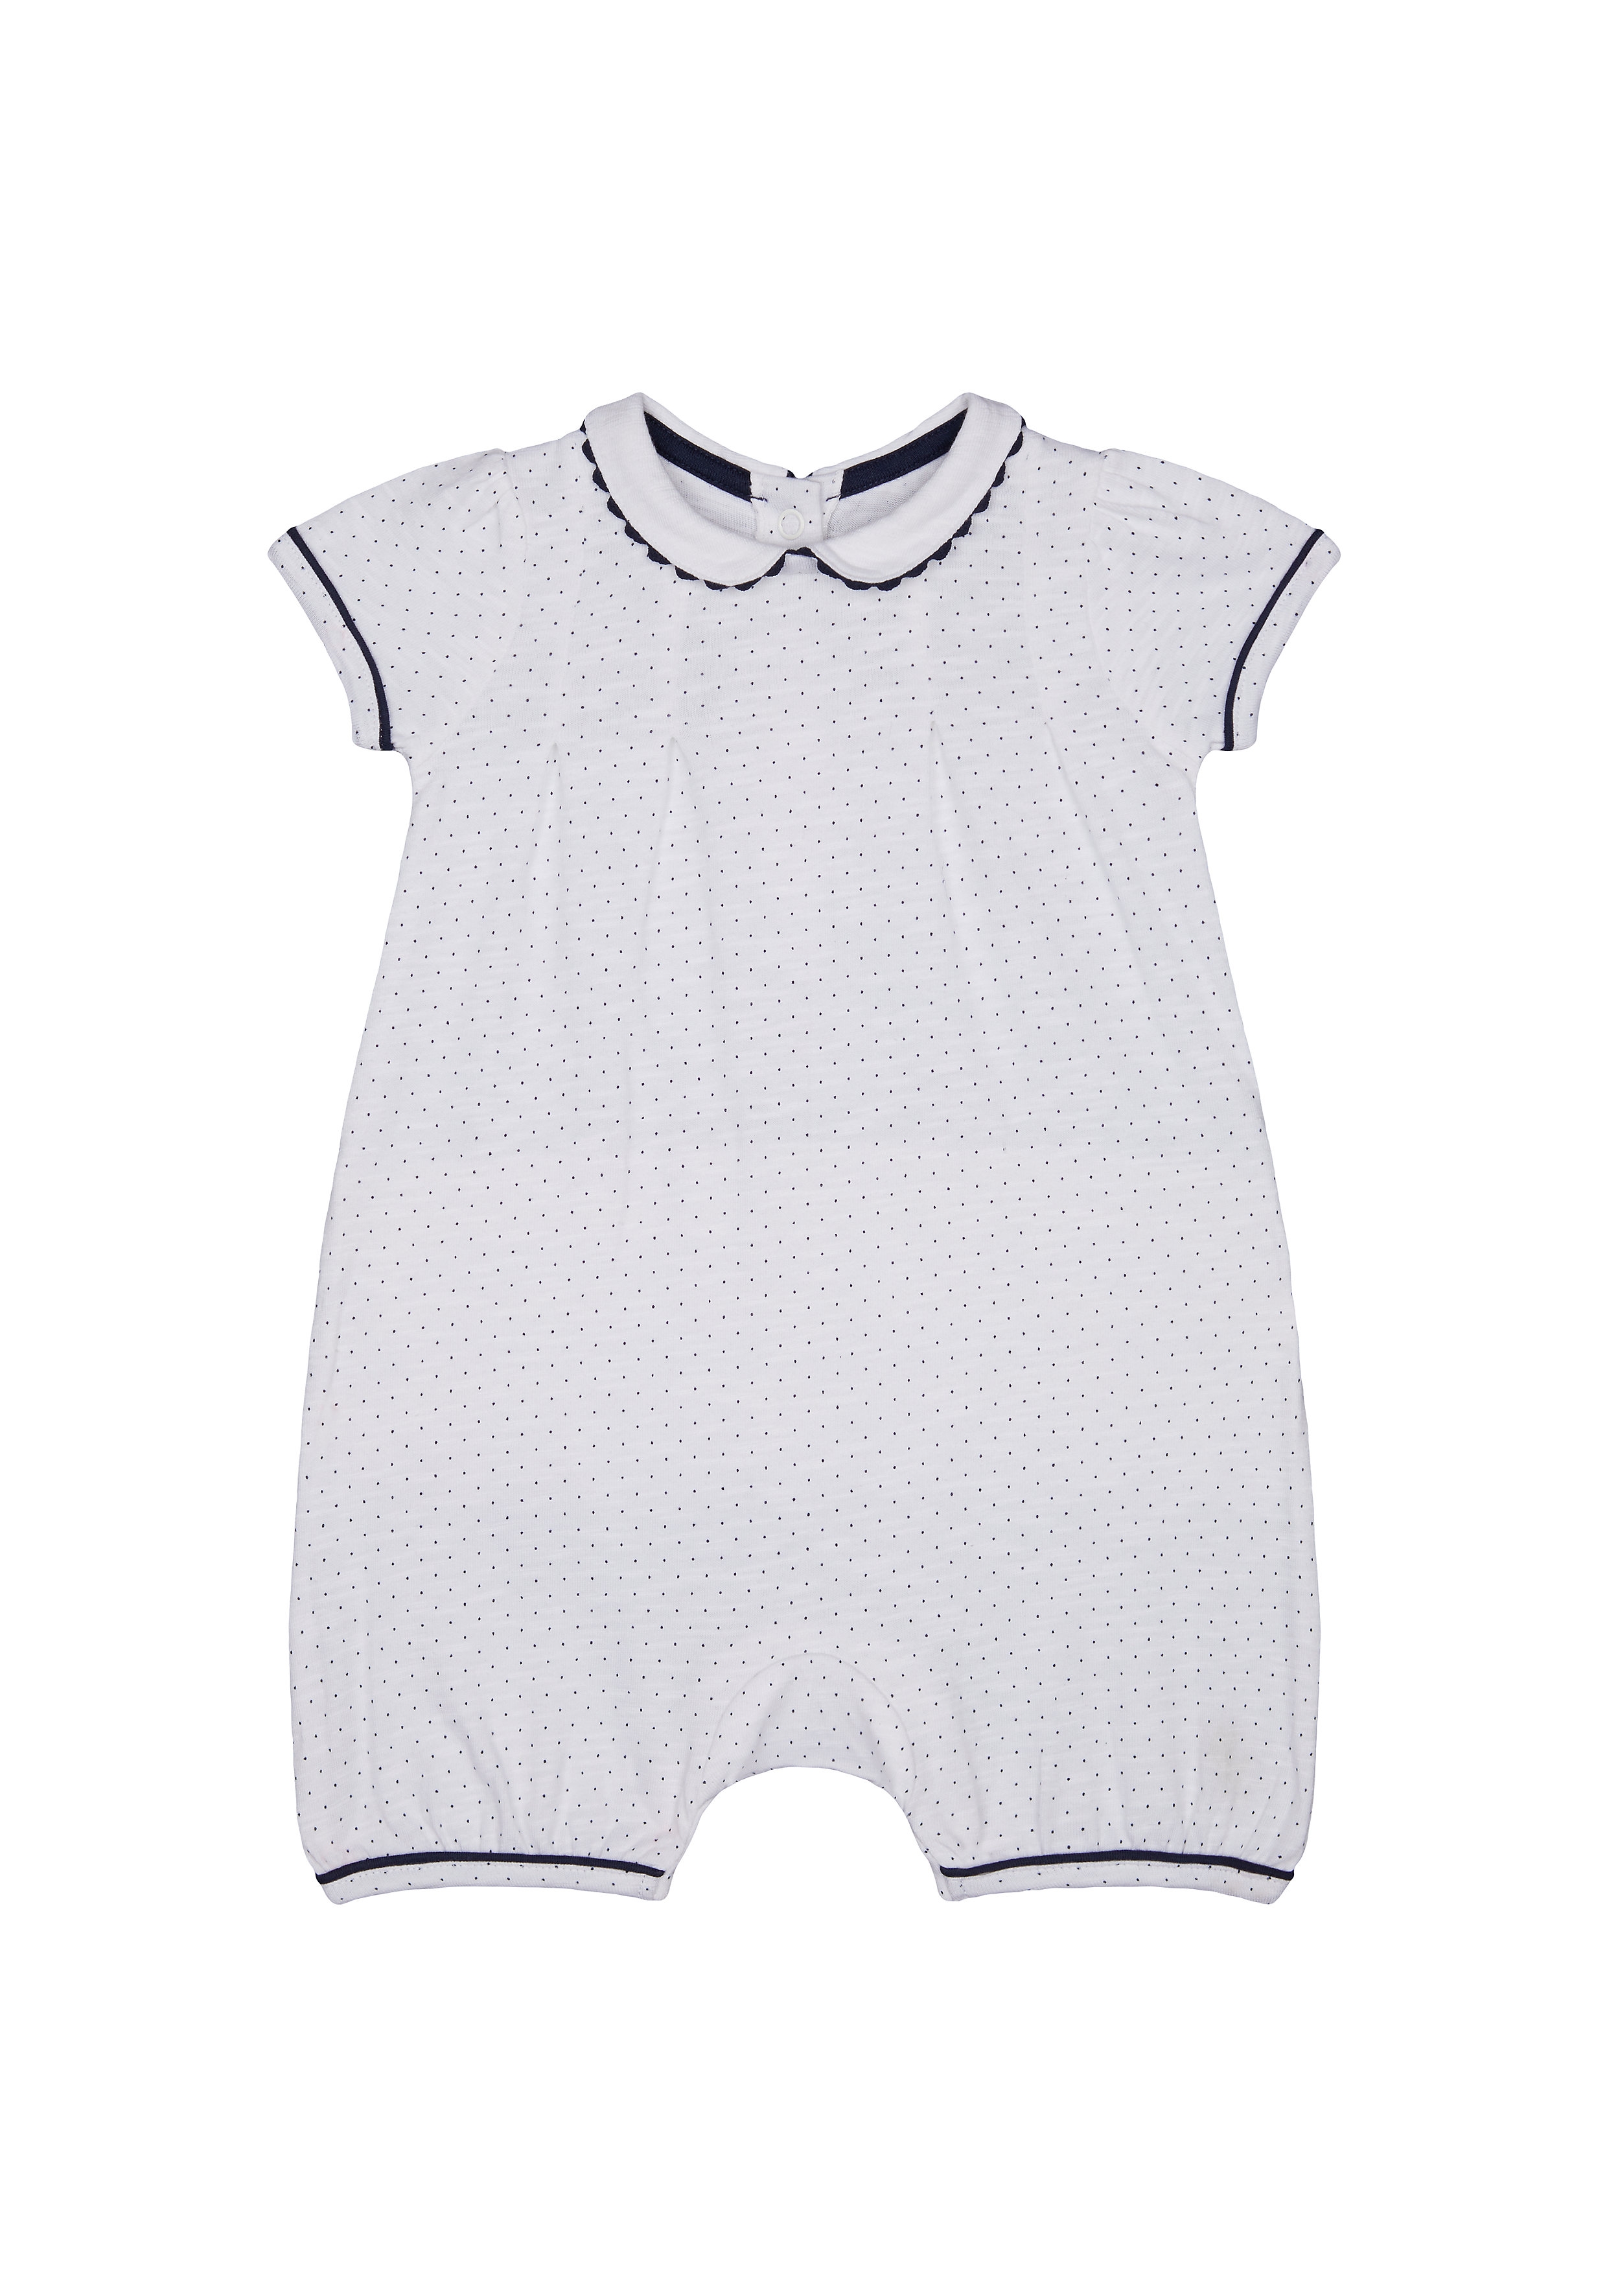 Girls Half Sleeves Romper Polka Dot Print With Lace Details - White